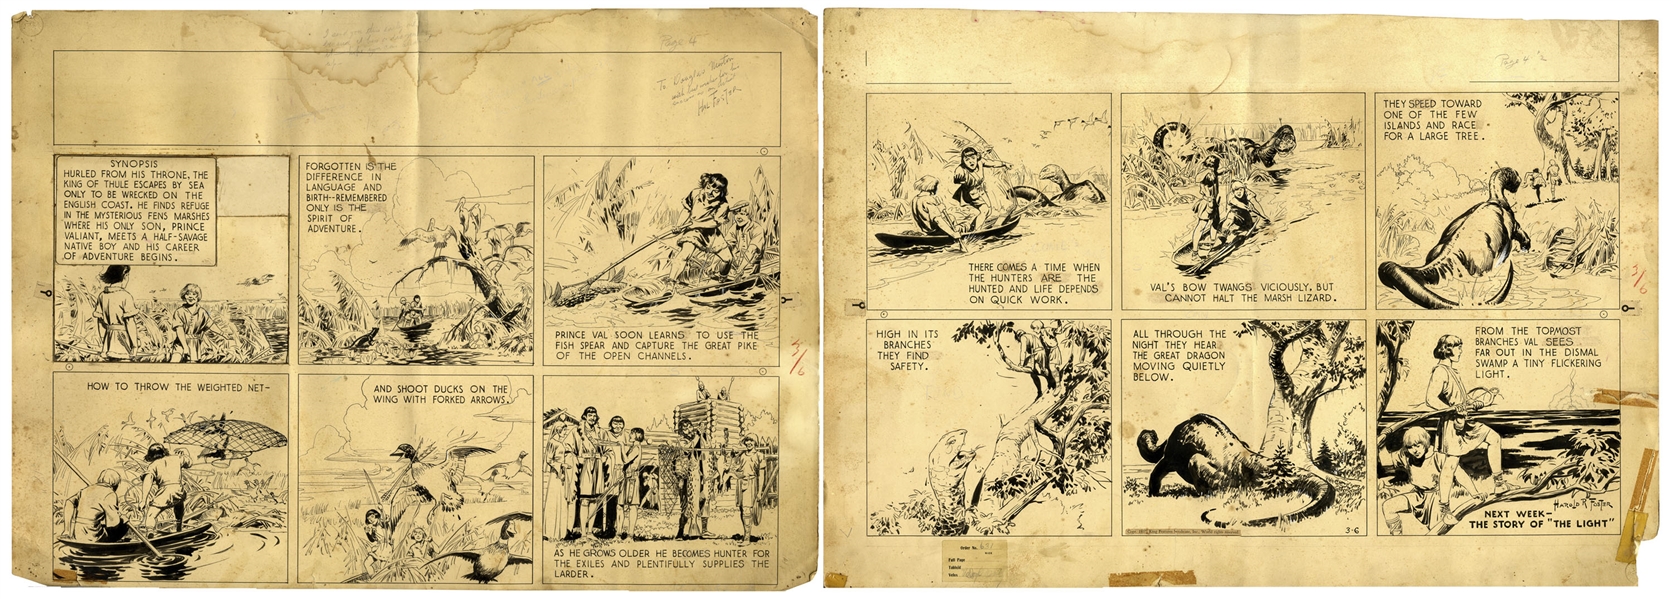 Al Feldstein Art Prince Valiant Strip by Hal Foster Dated 6 March 1937 -- 4th Prince Valiant Strip in the Series! -- Val's ''Career of Adventure Begins'' Here, Showing His Growth From Boy to Young Man